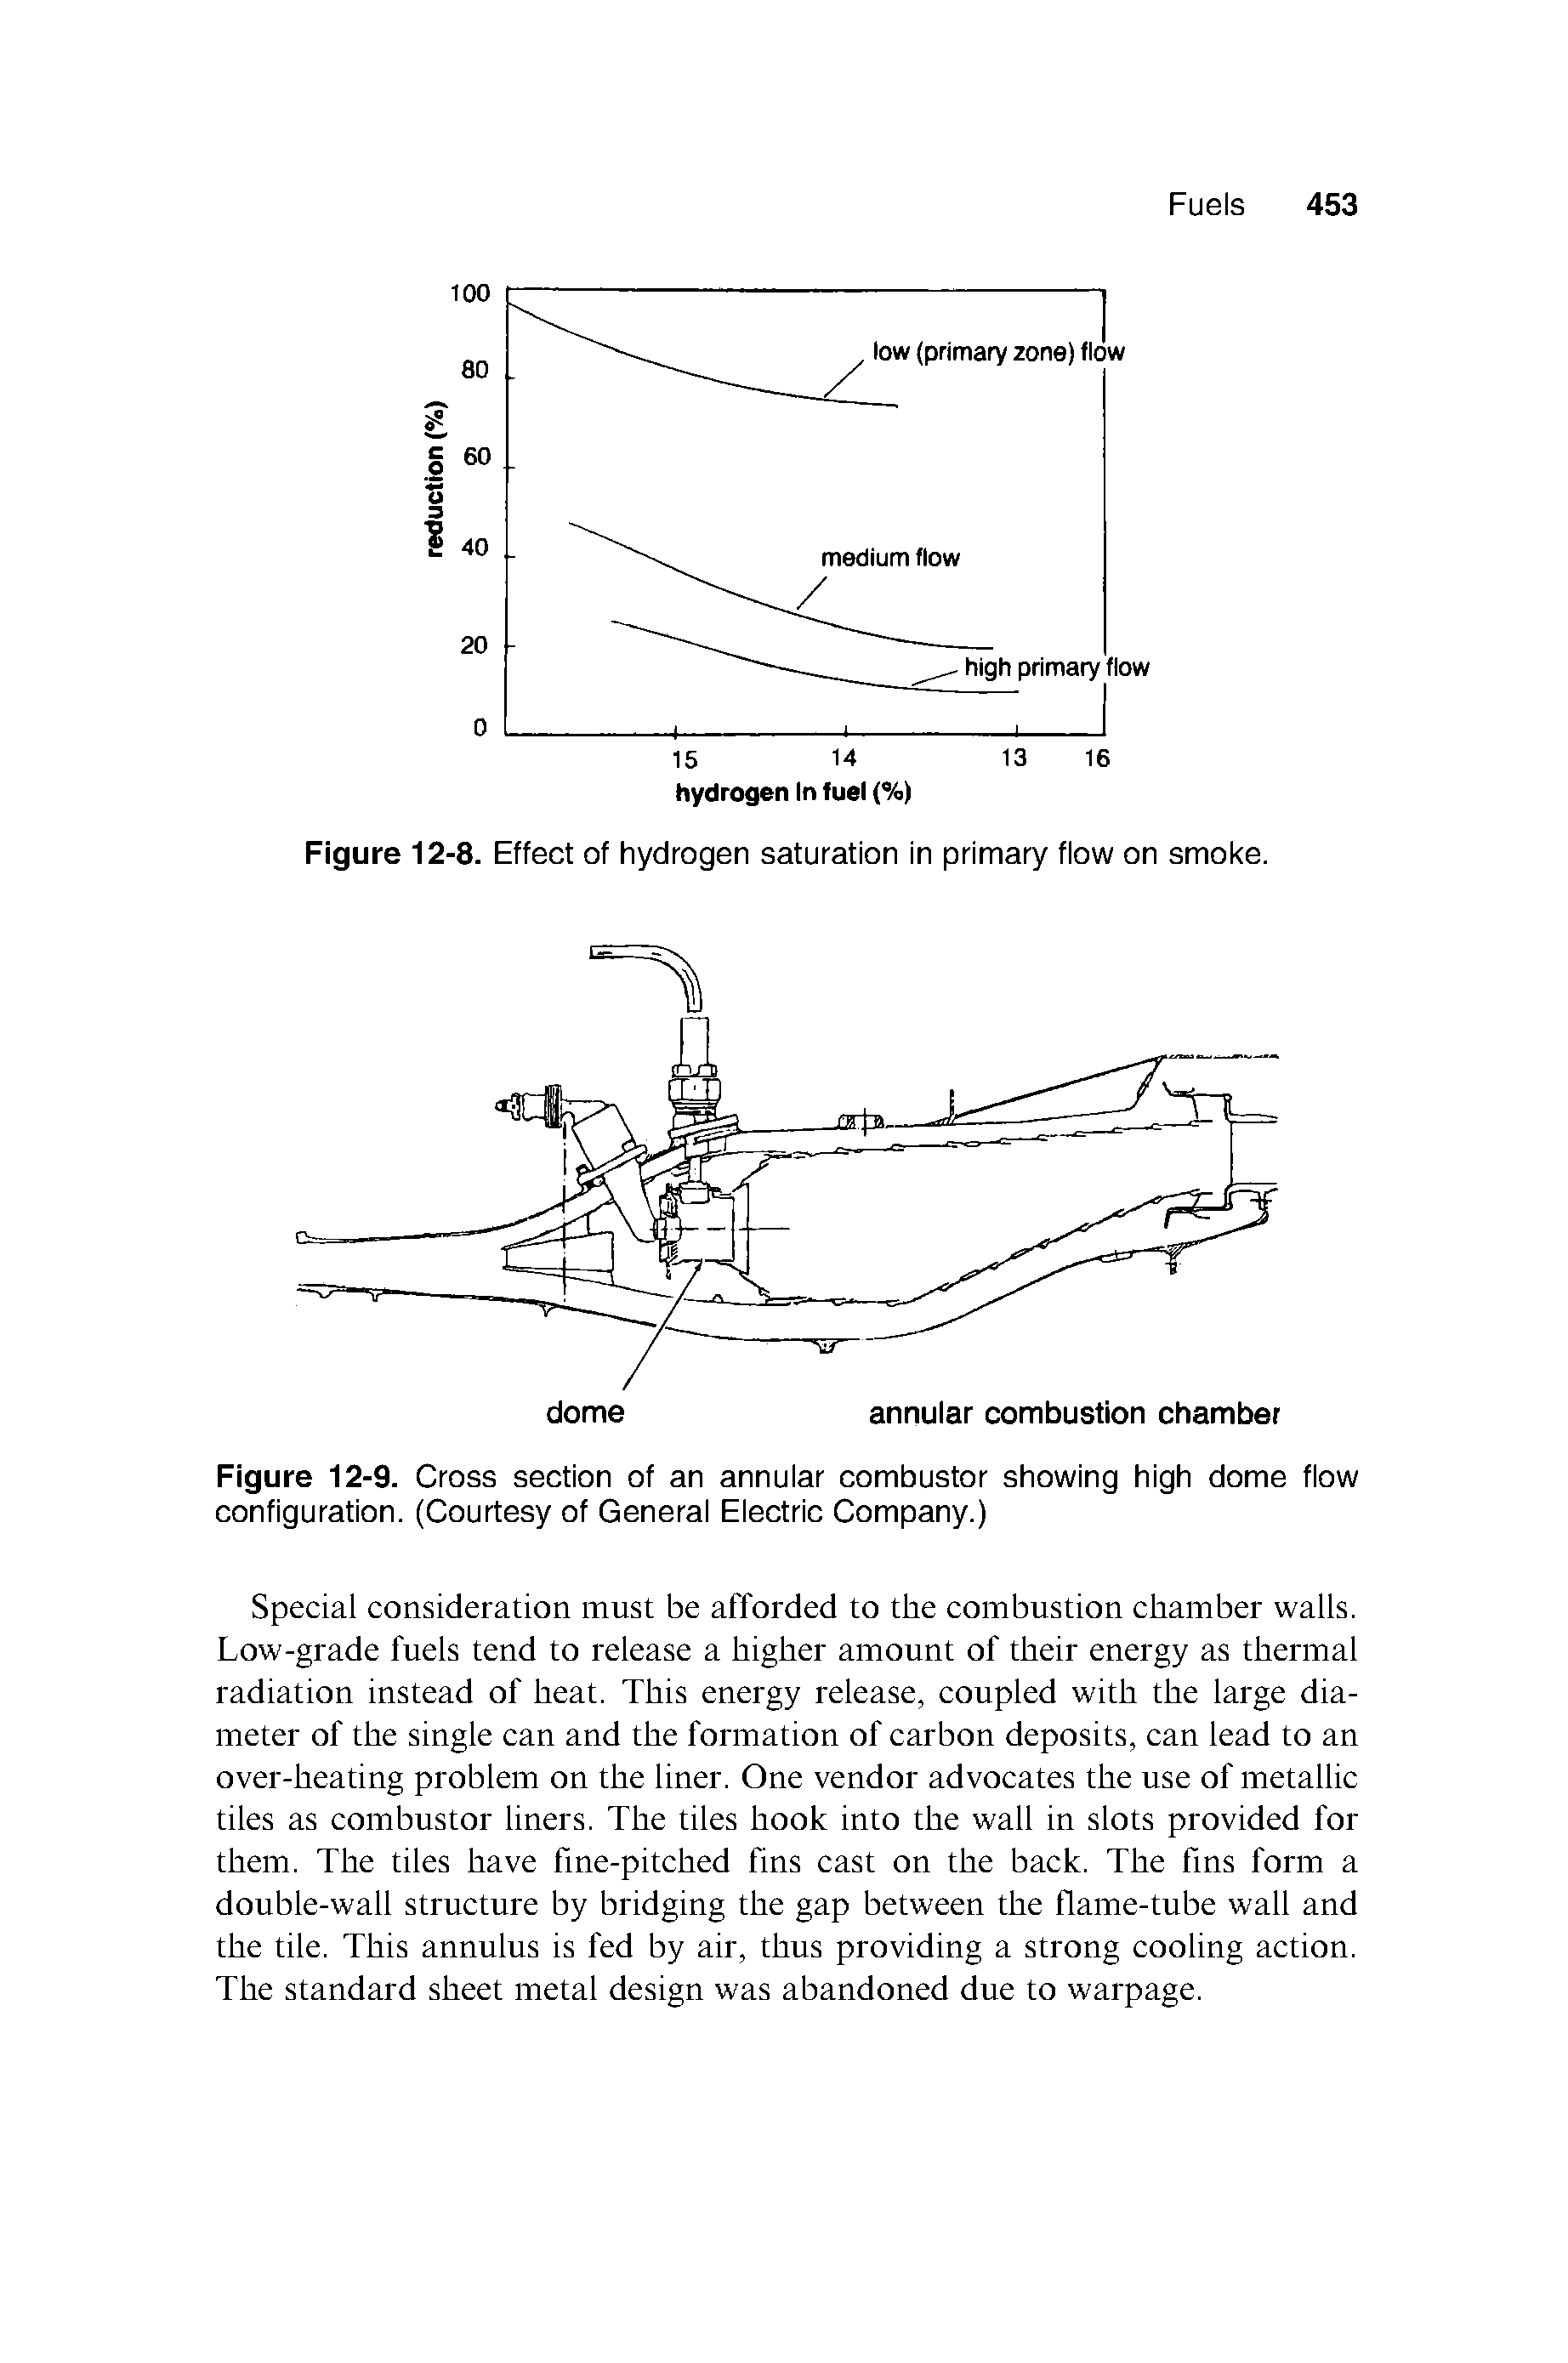 Figure 12-8. Effect of hydrogen saturation in primary flow on smoke.